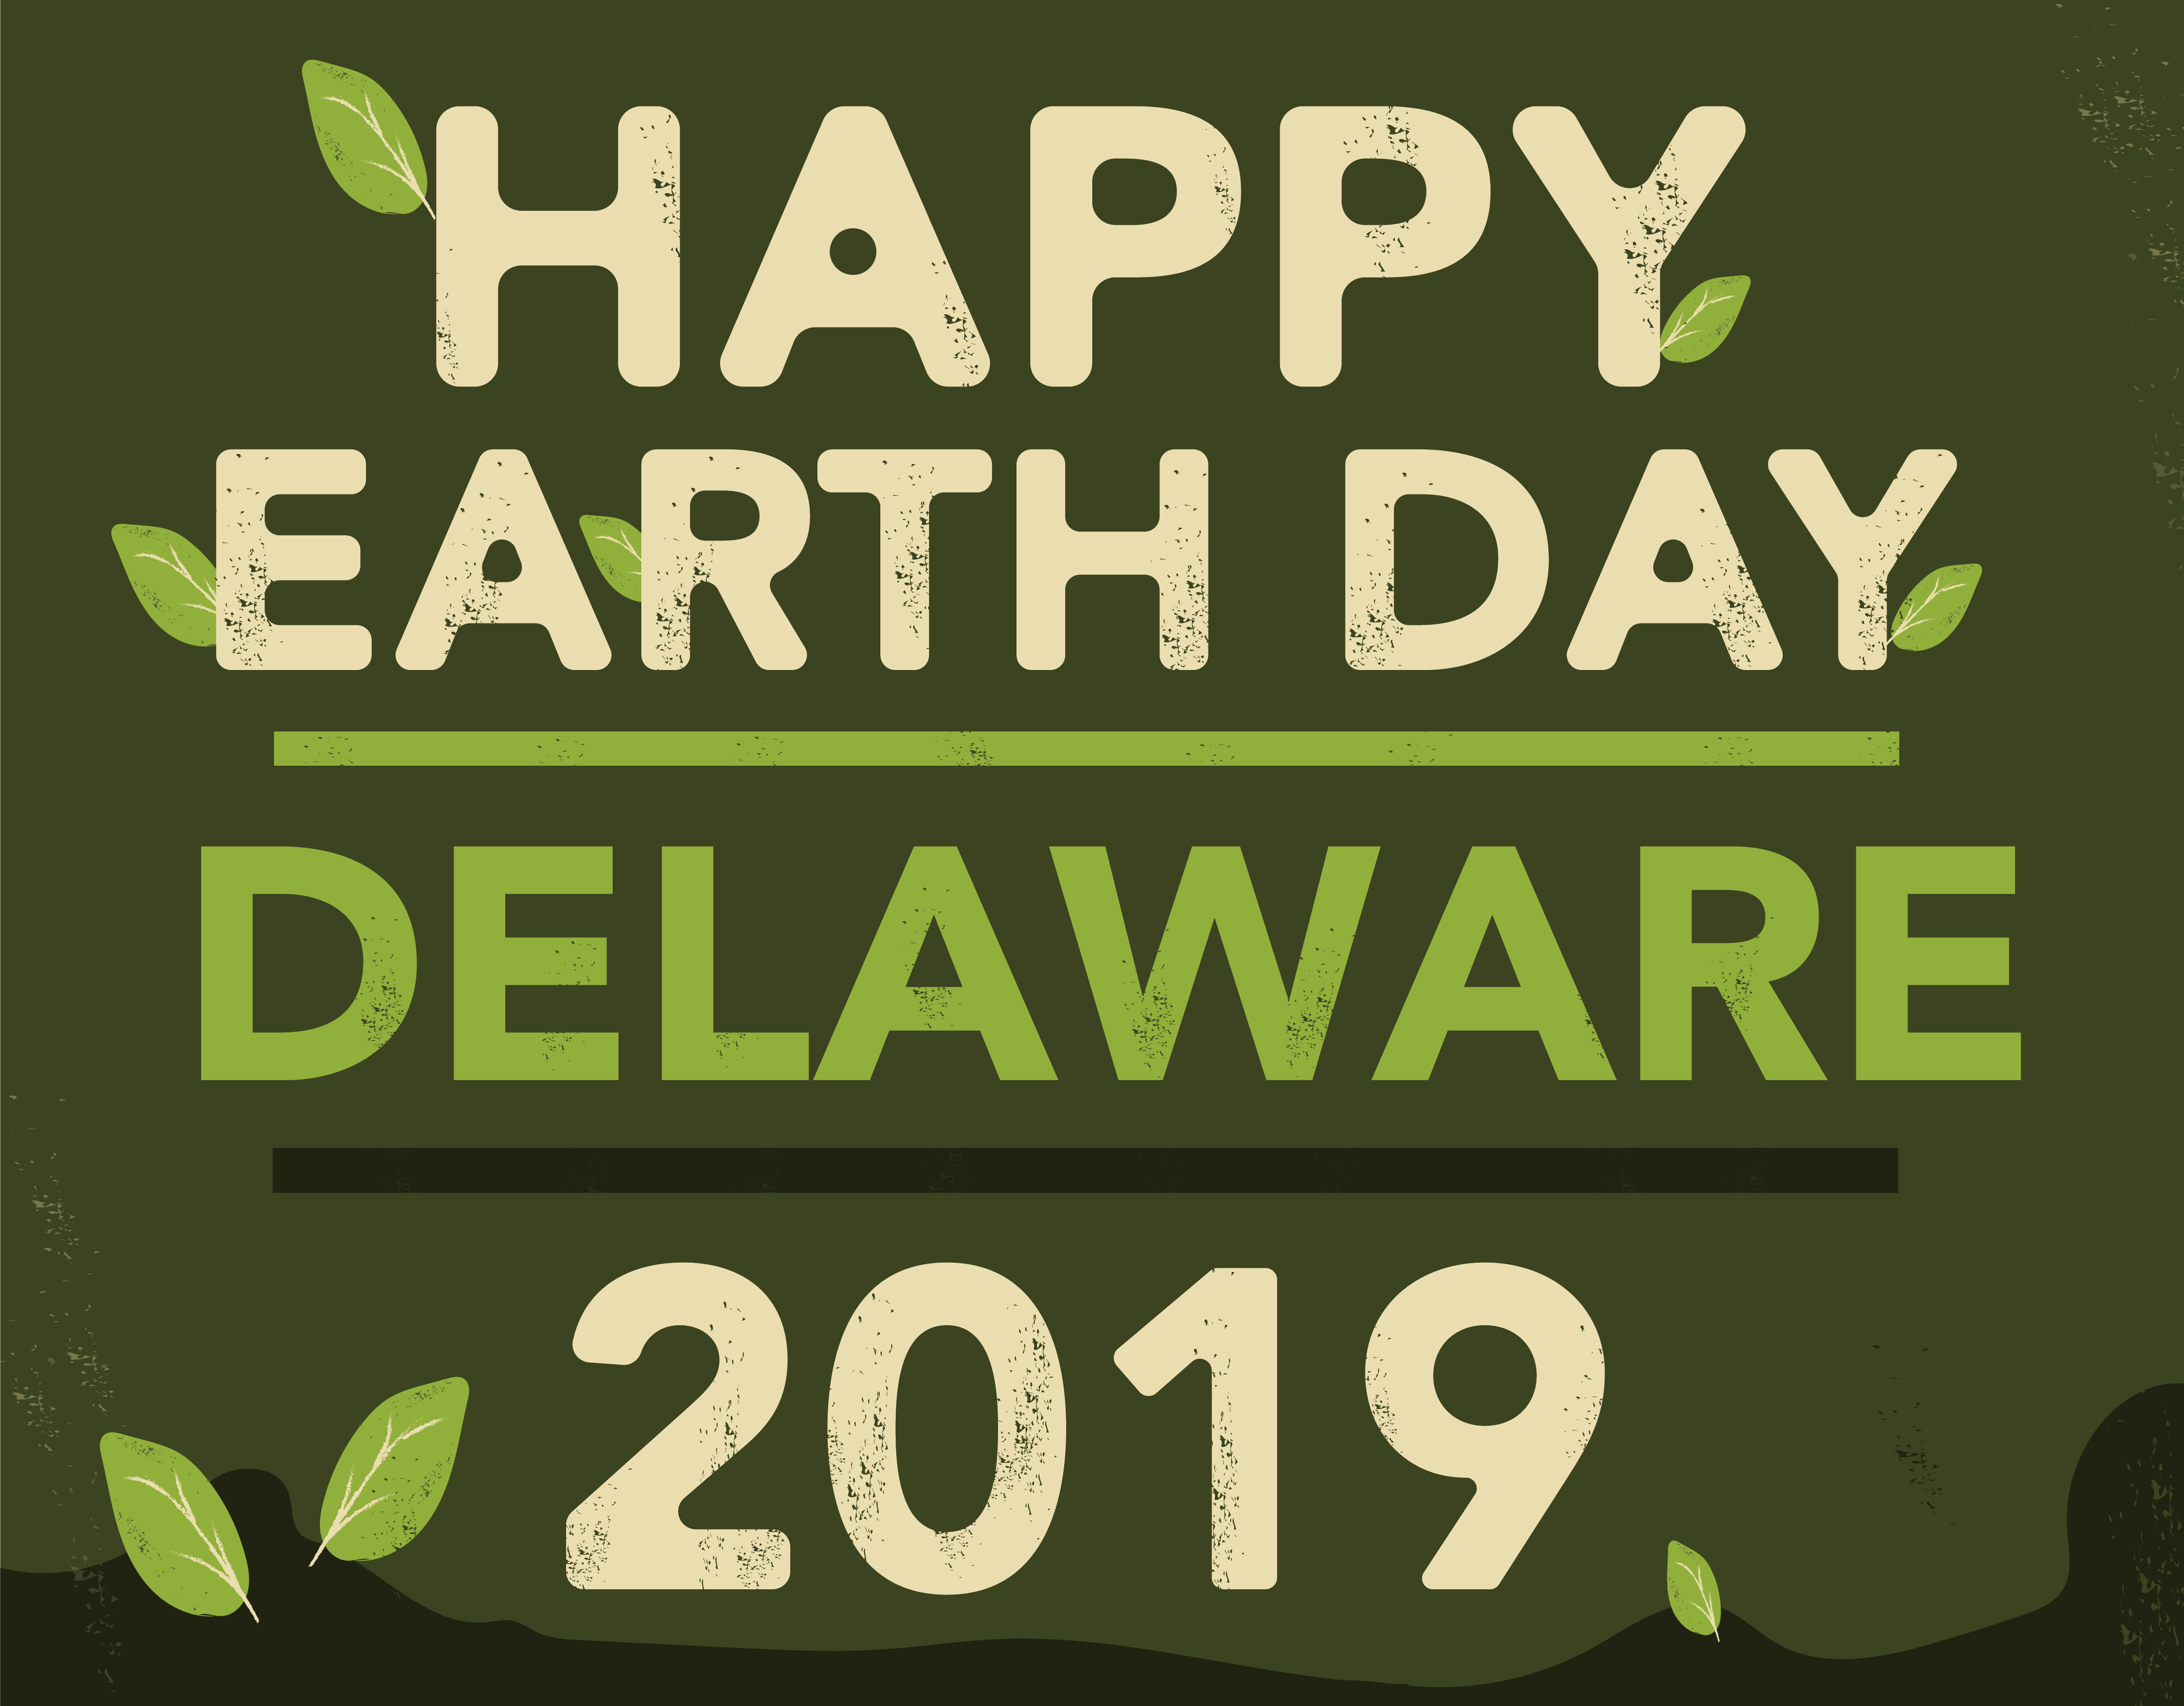 Celebrating Earth Day 2019